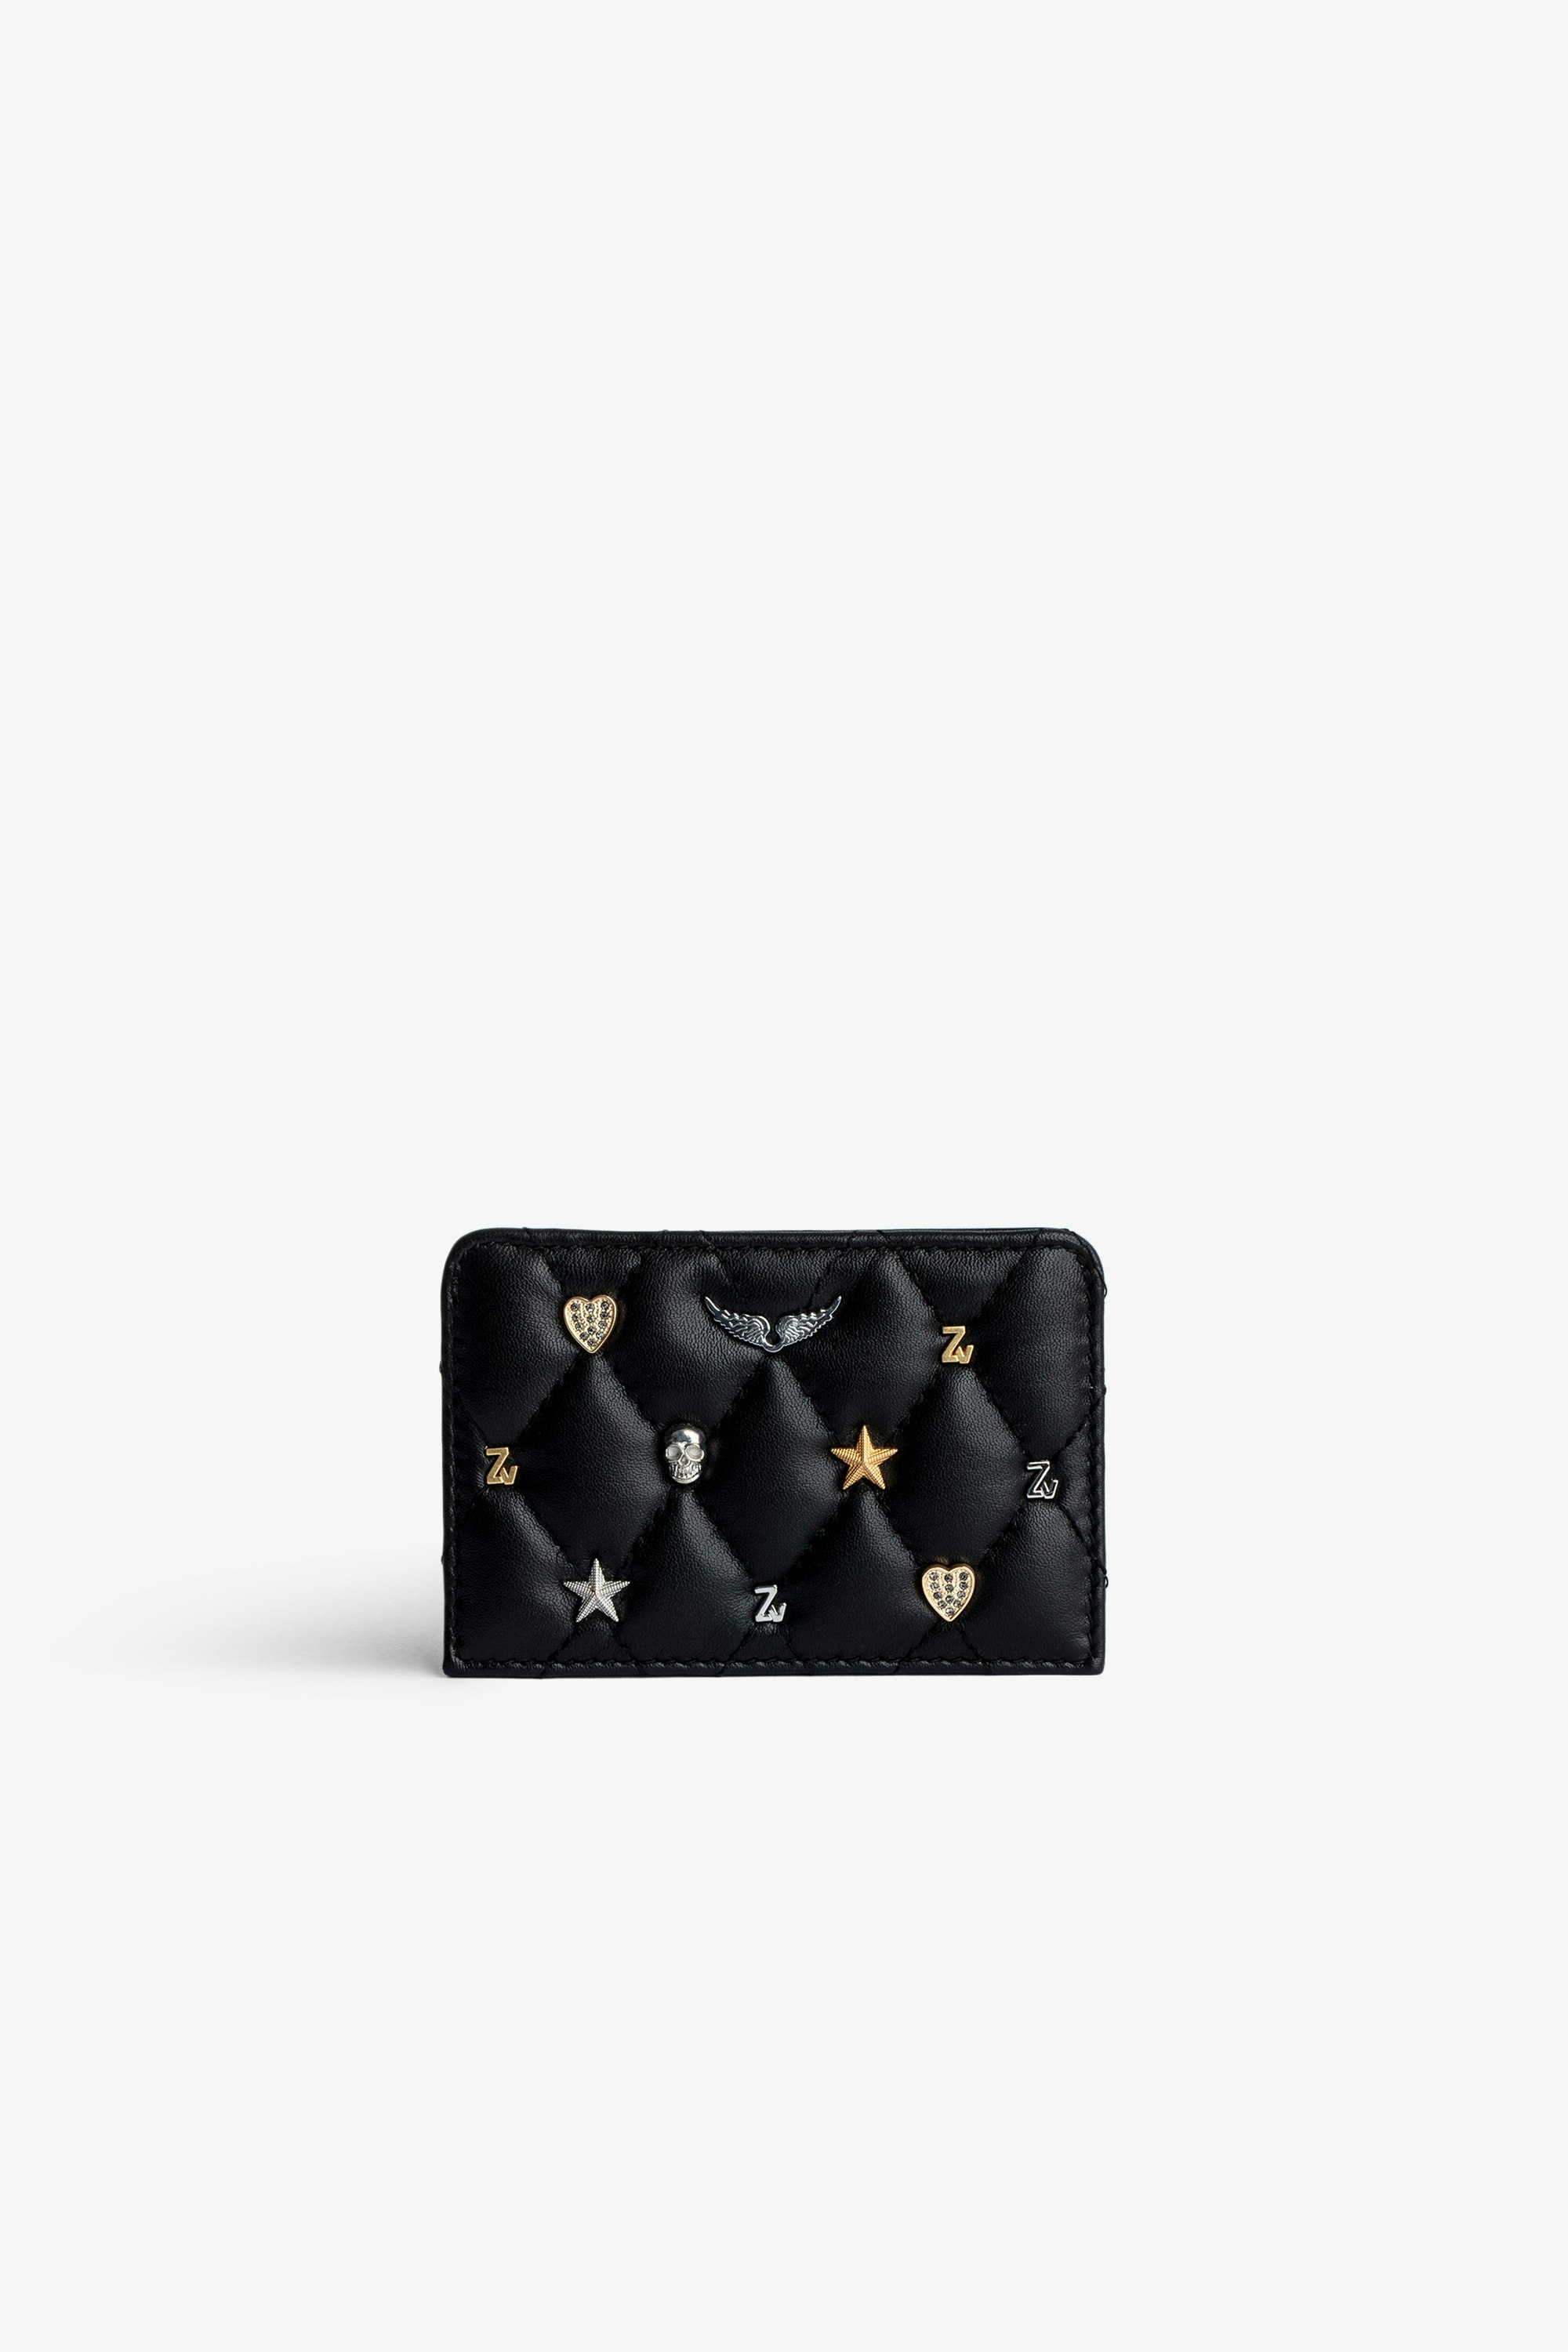 ZV Pass 財布 Women’s black quilted leather card holder with silver- and gold-tone charms